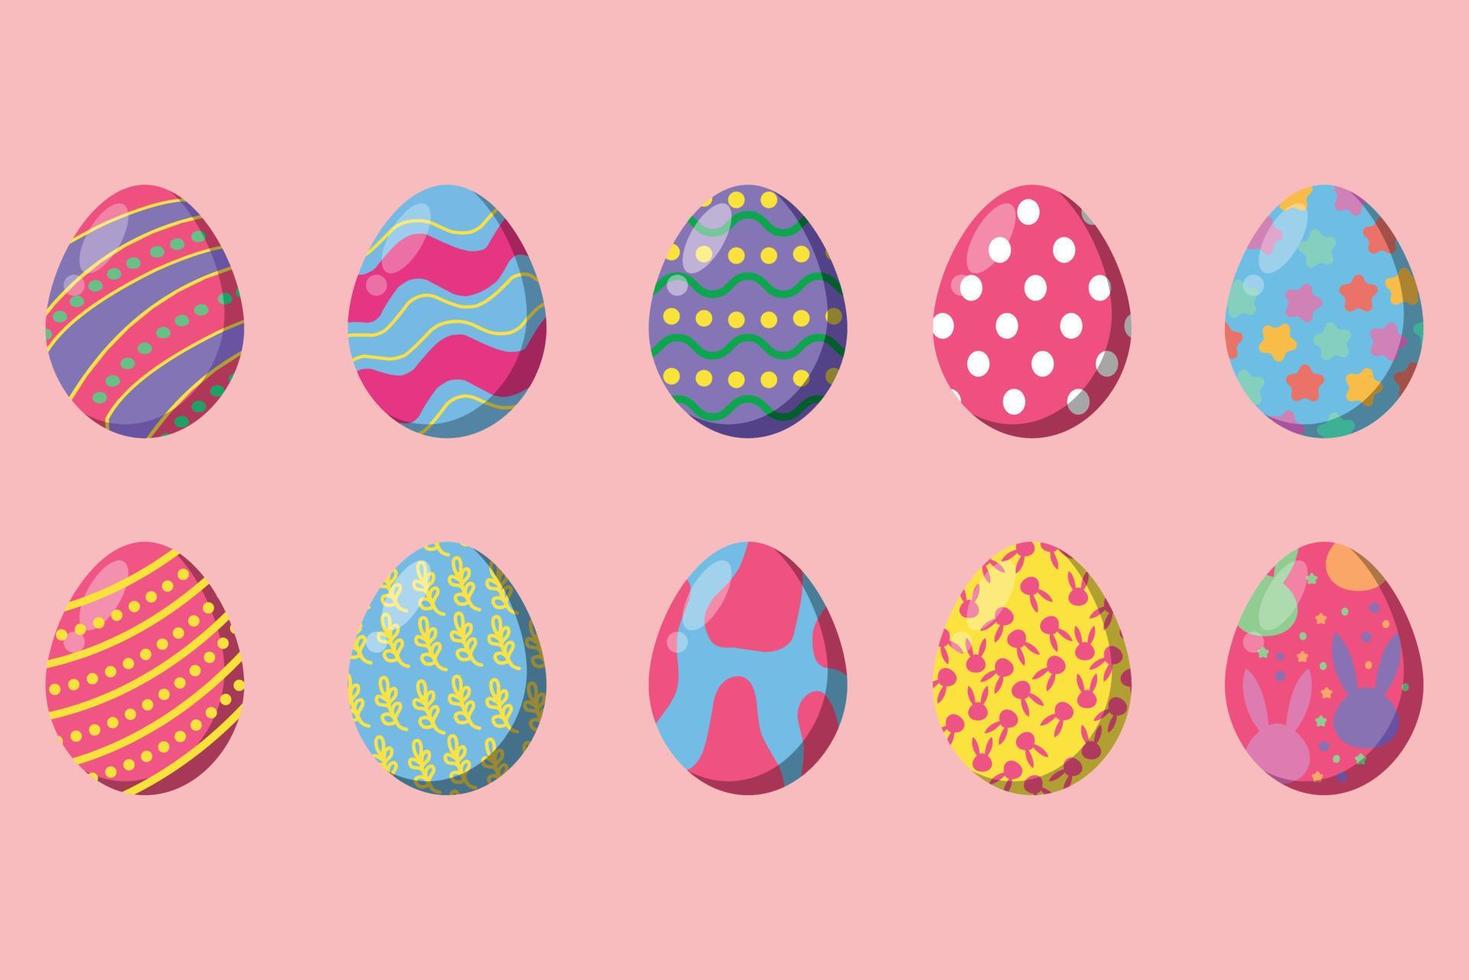 Colored easter eggs or color ostern egg icons with decoration patterns vector illustration.